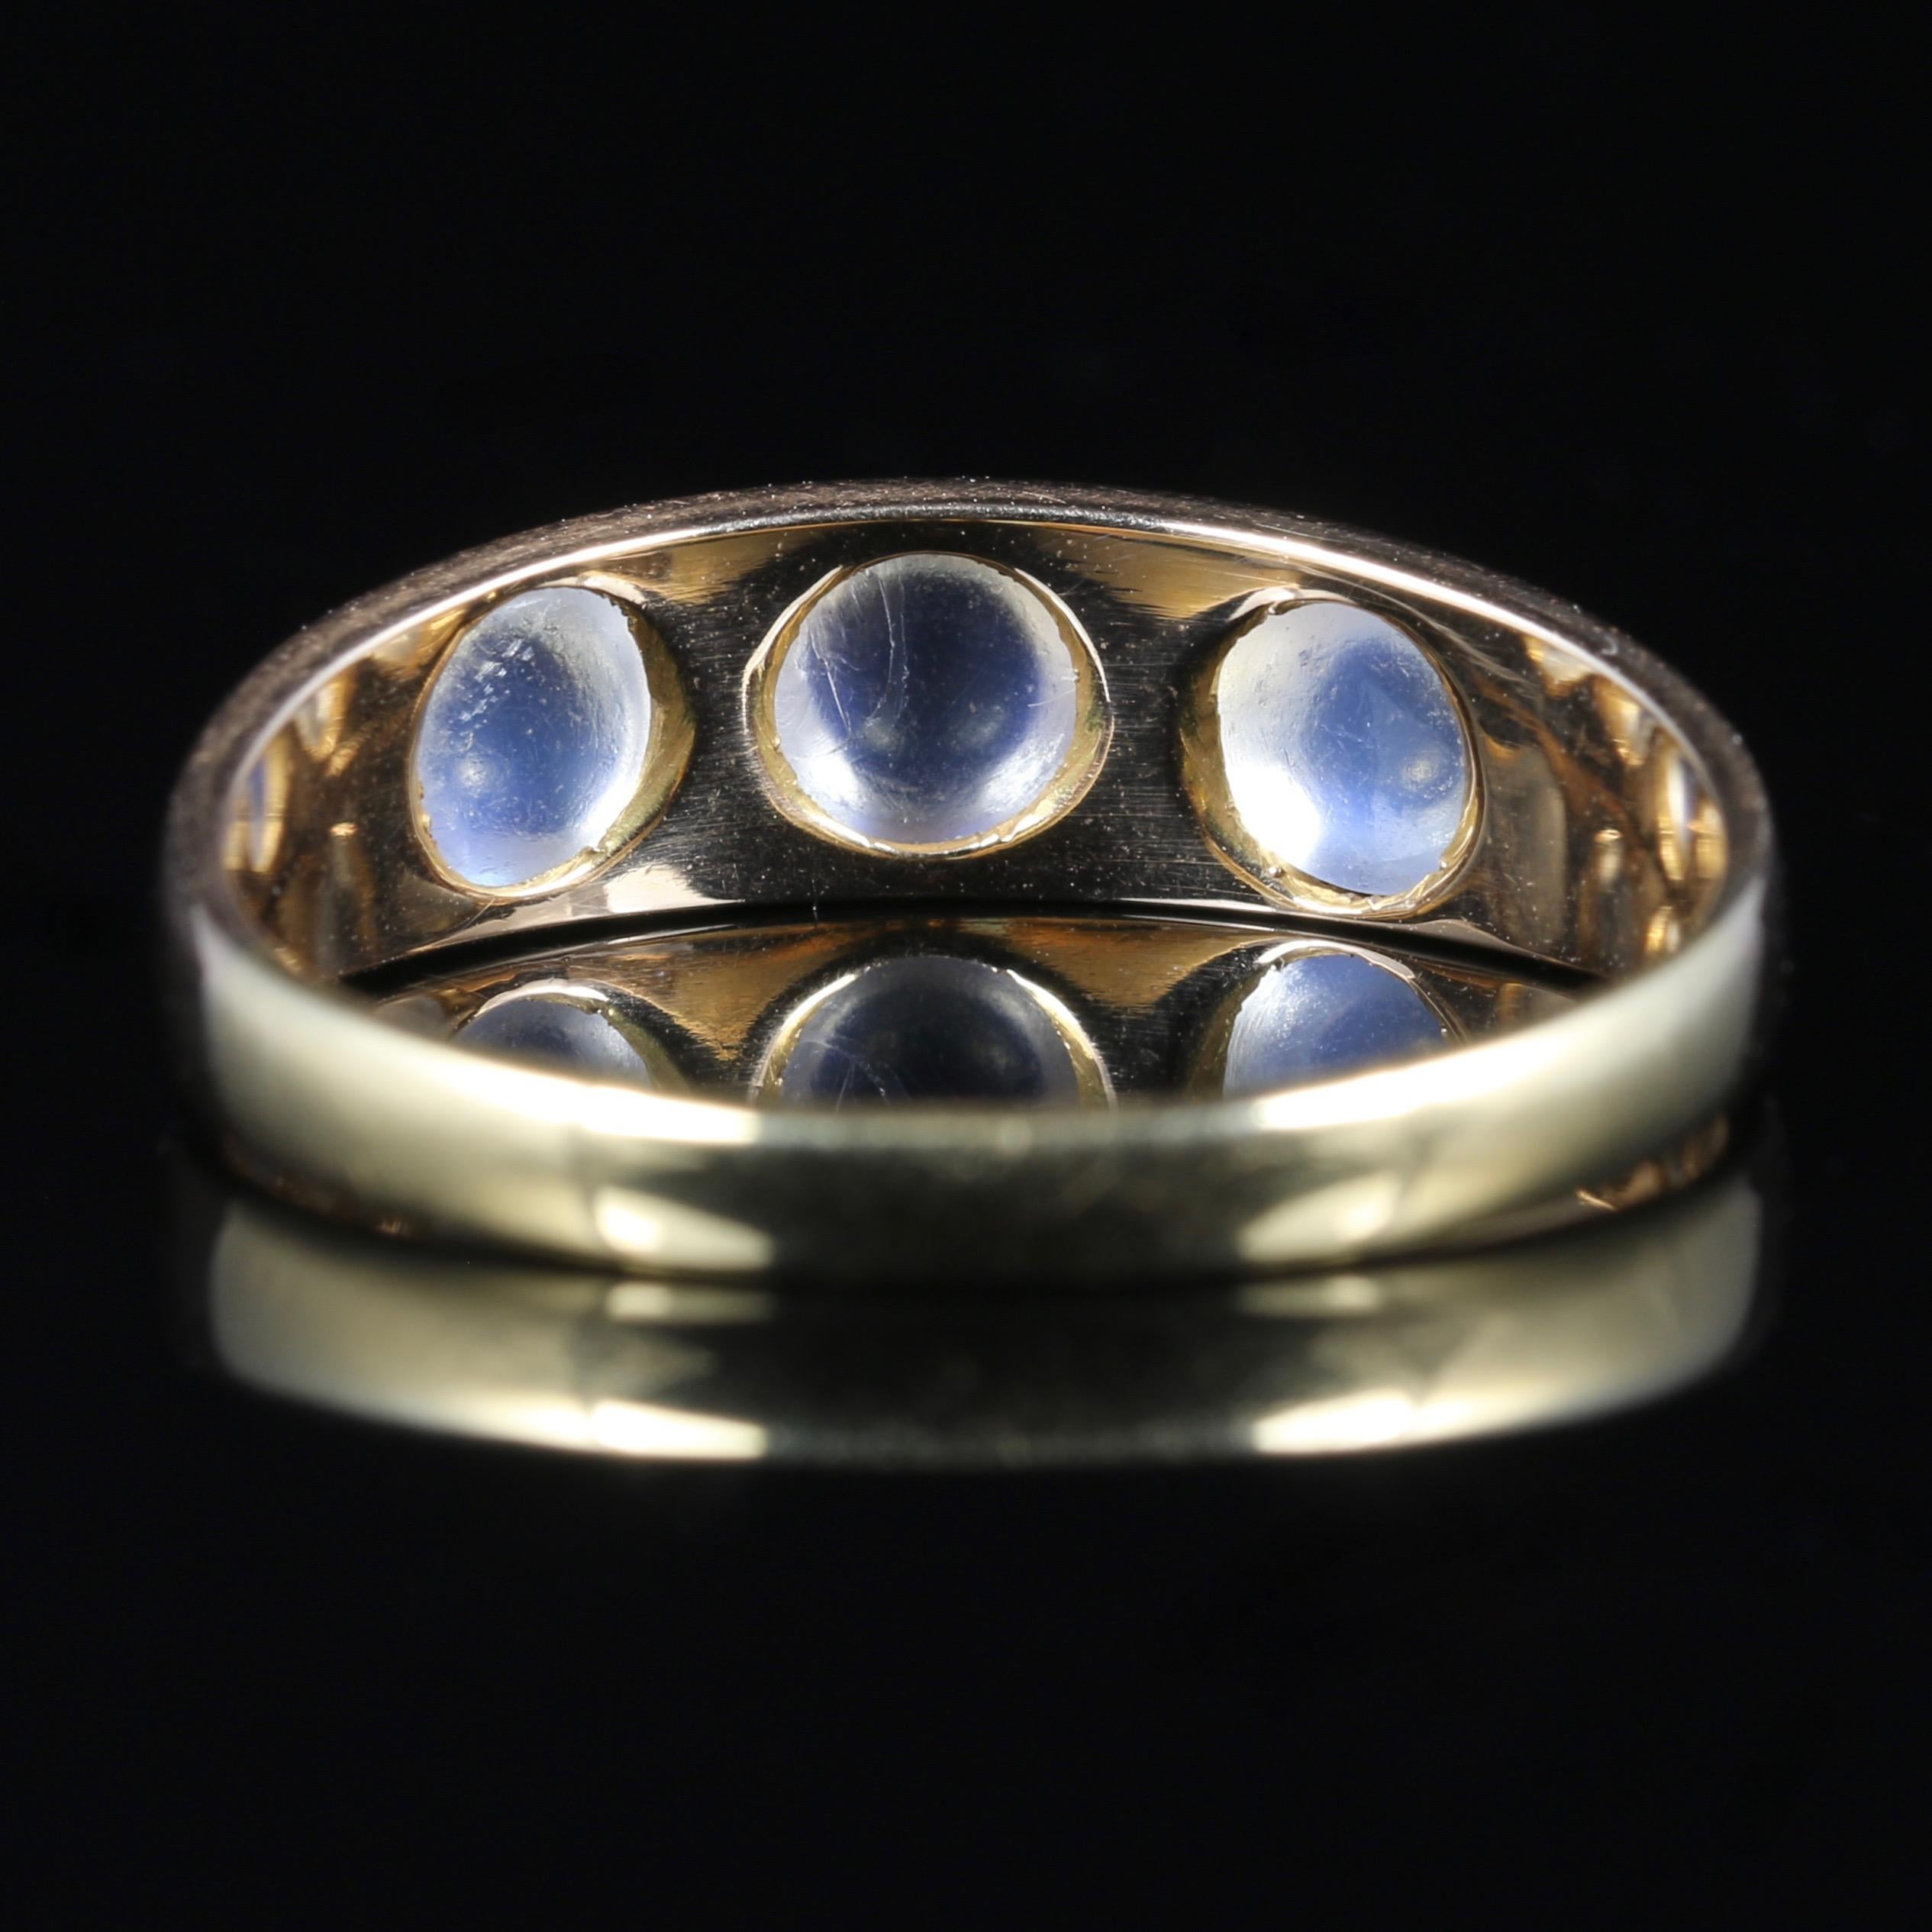 Antique Victorian Moonstone Trilogy Ring 18 Carat Gold, circa 1880 In Excellent Condition In Lancaster, Lancashire